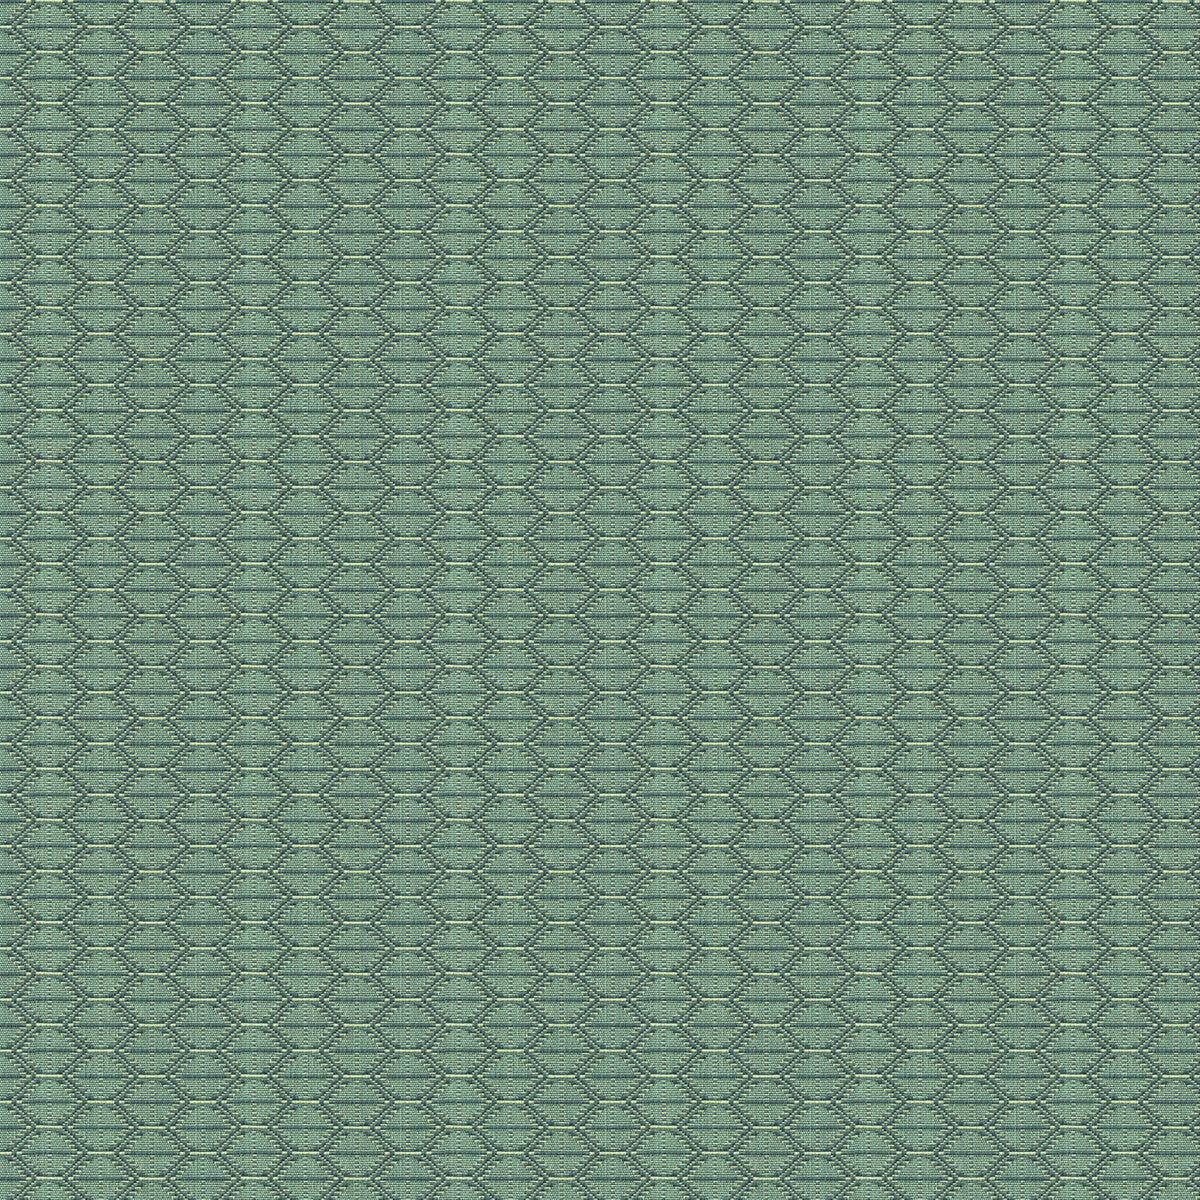 Kravet Design fabric in 33880-15 color - pattern 33880.15.0 - by Kravet Design in the Tanzania J Banks collection